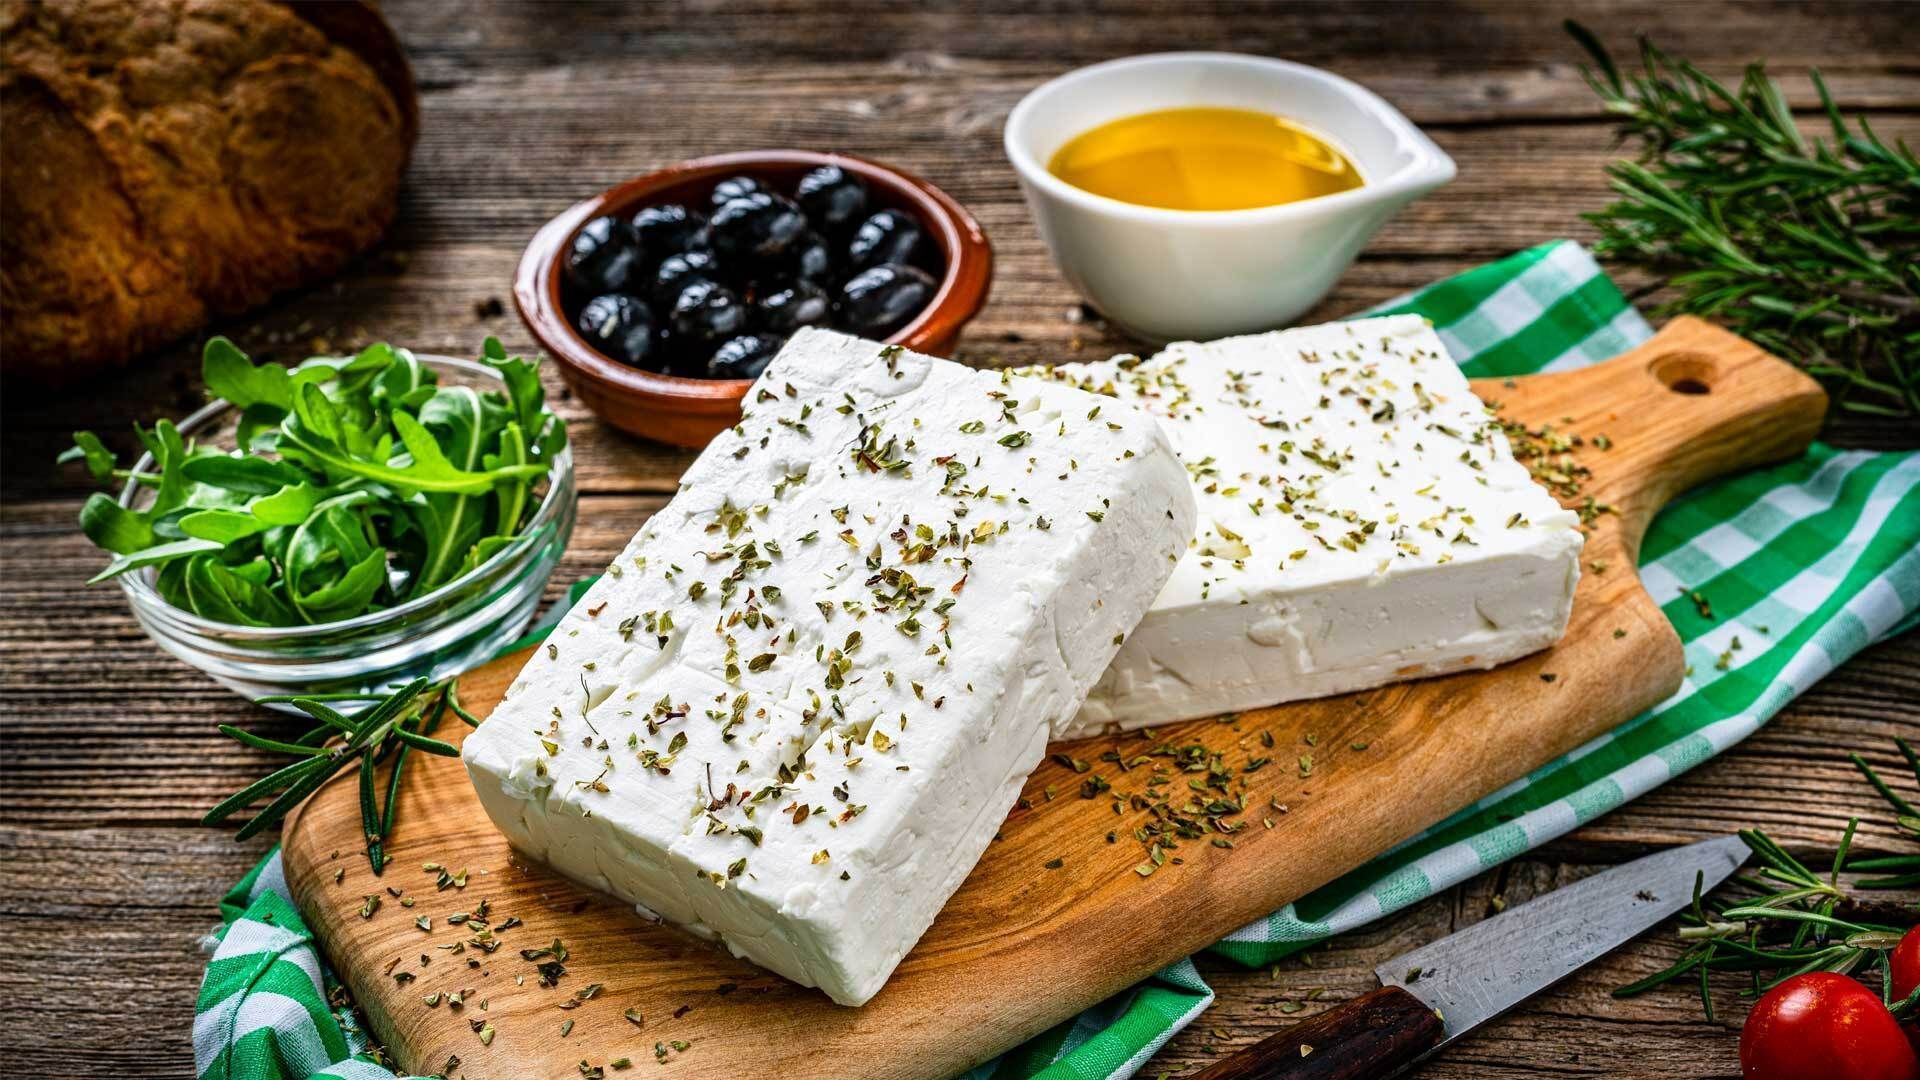 Sheep cheese in pregnancy: How healthy is it?